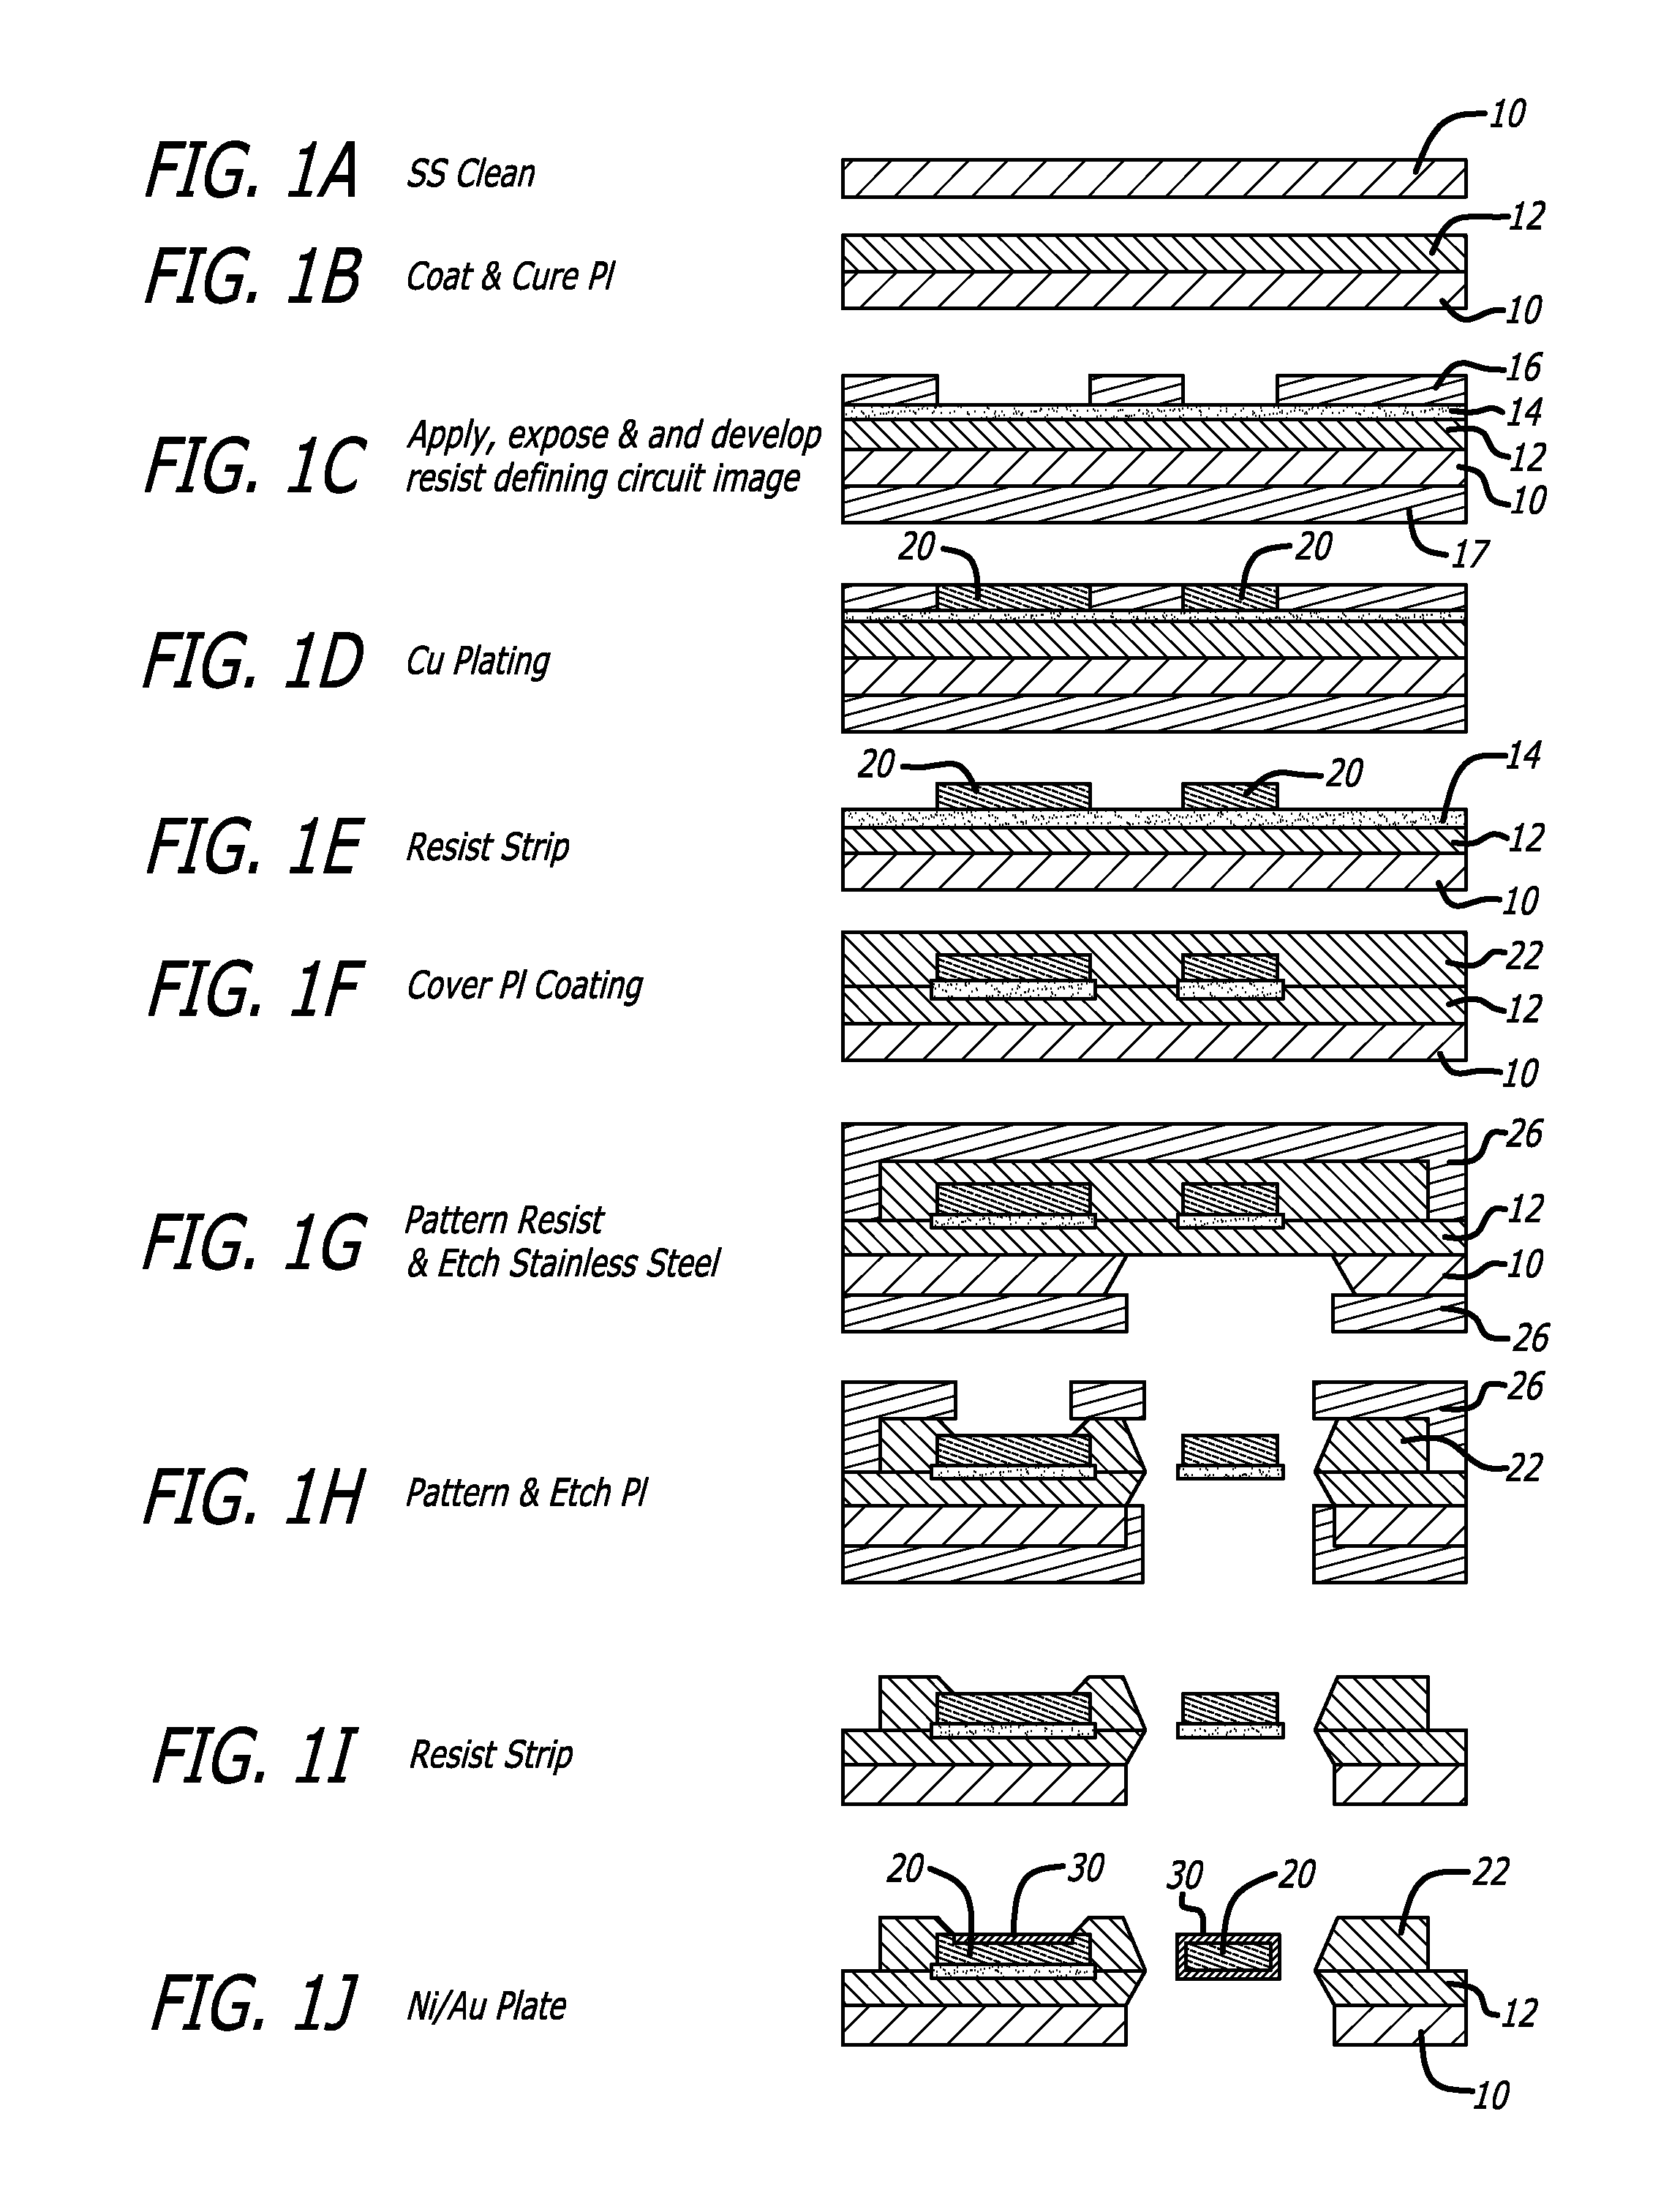 High strength electrodeposited suspension conductors